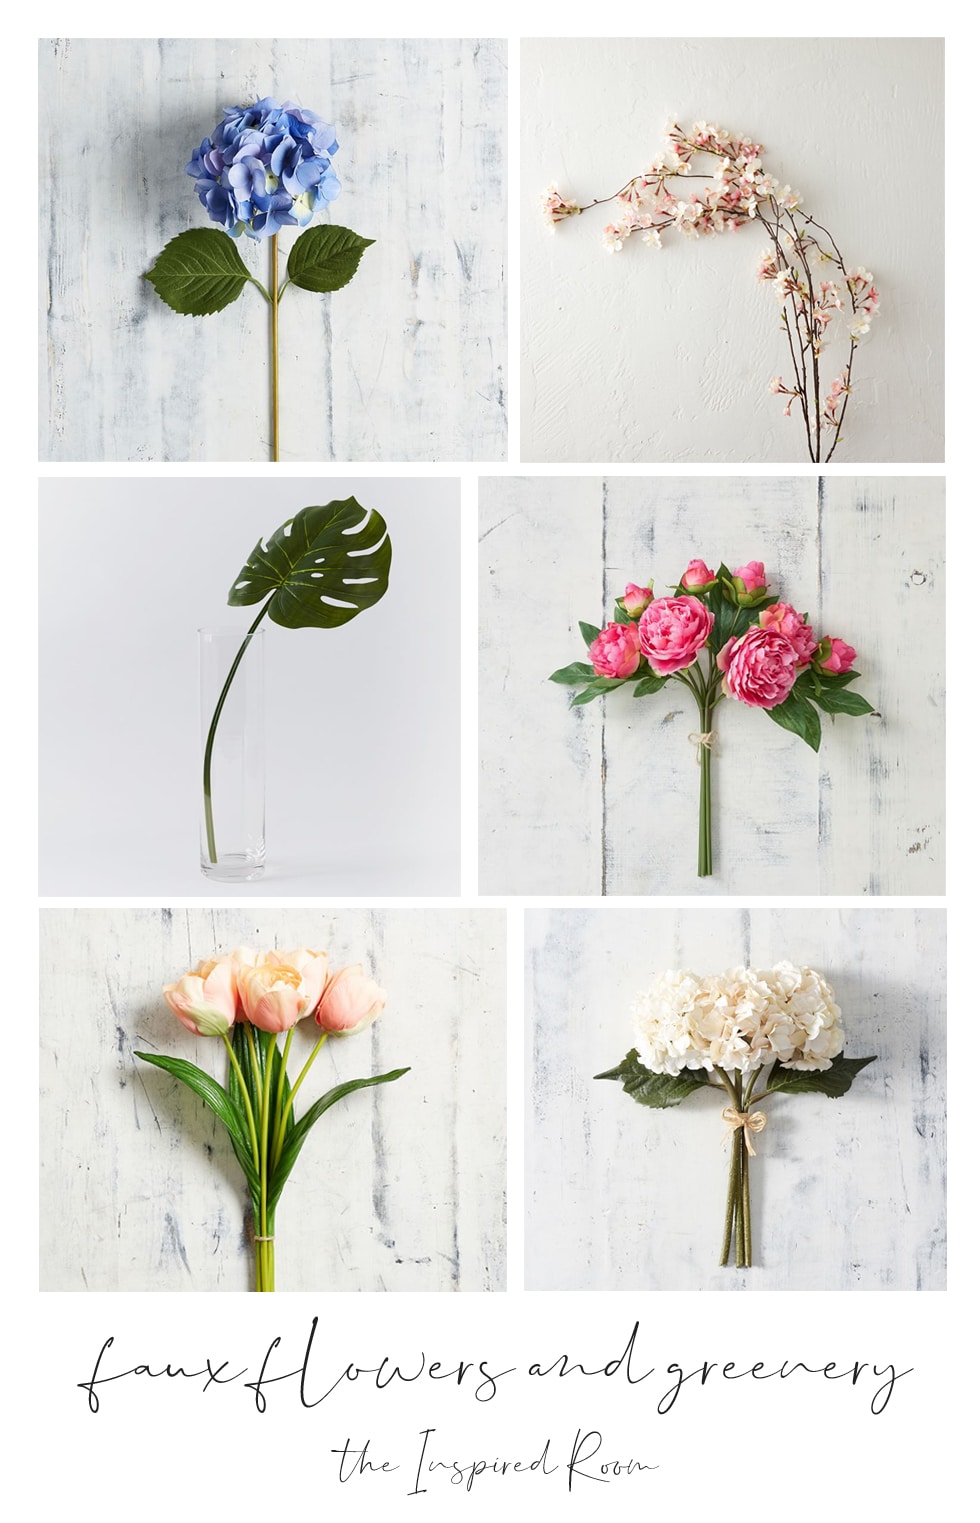 Decorating with Faux Flowers